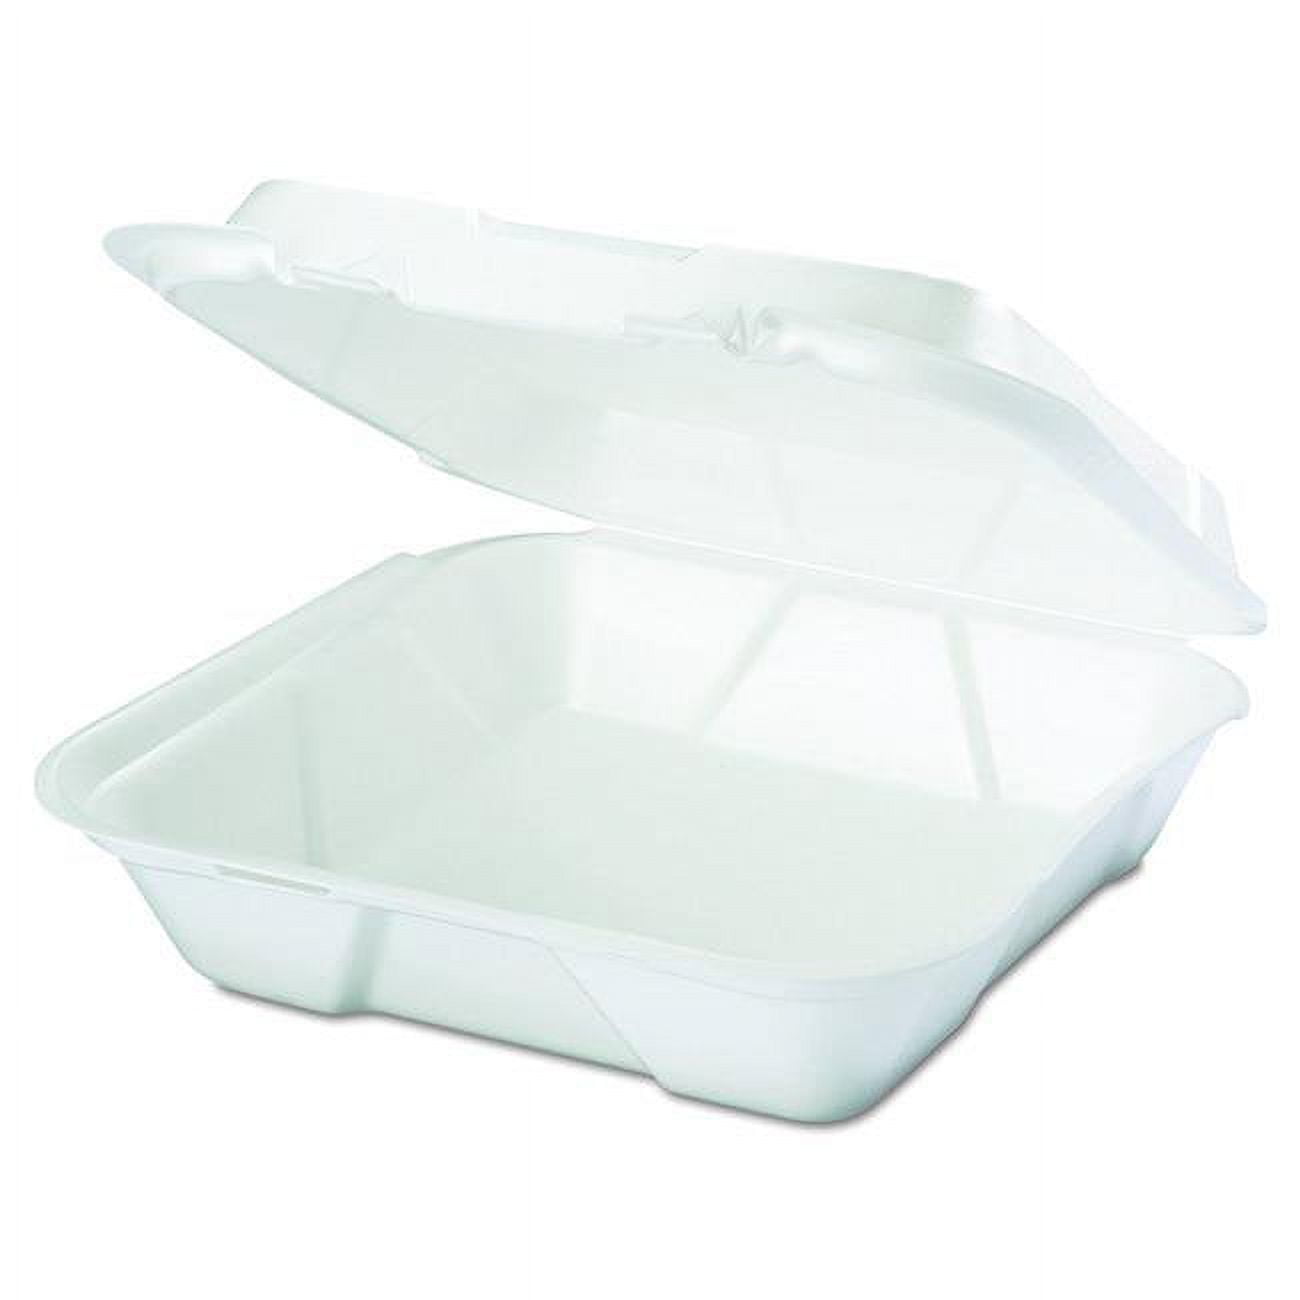 Sn200 Cpc 9 X 9 X 3 In. 1 Compartment Hinged Foam Tray-snaplock Container, White - Case Of 200